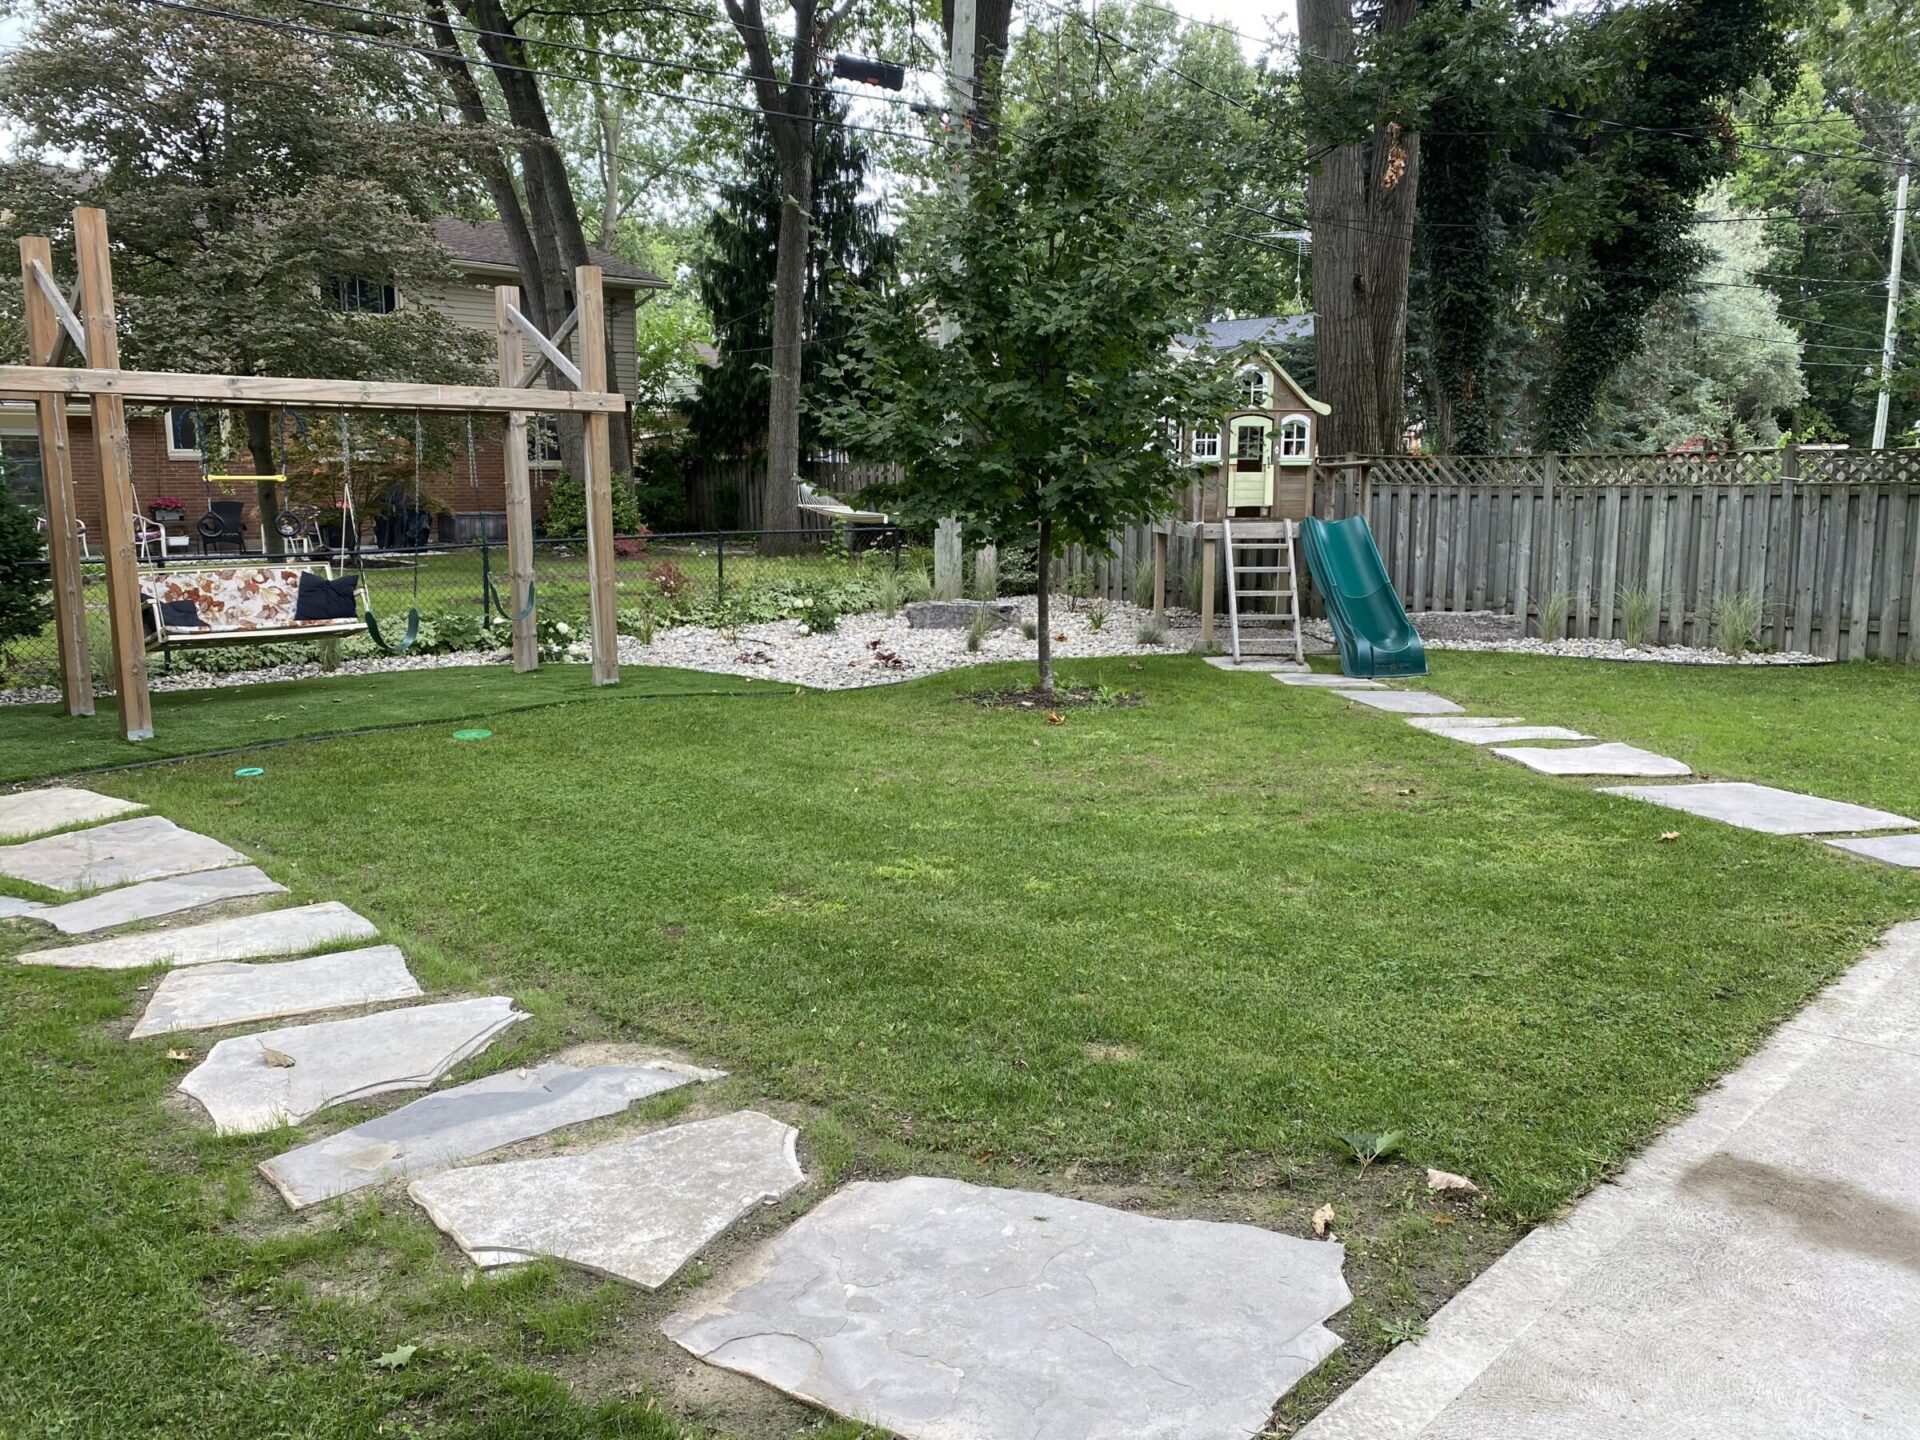 A backyard with a green lawn featuring a swing set, a playhouse on stilts with a slide, stepping stones, trees, and a wooden fence.